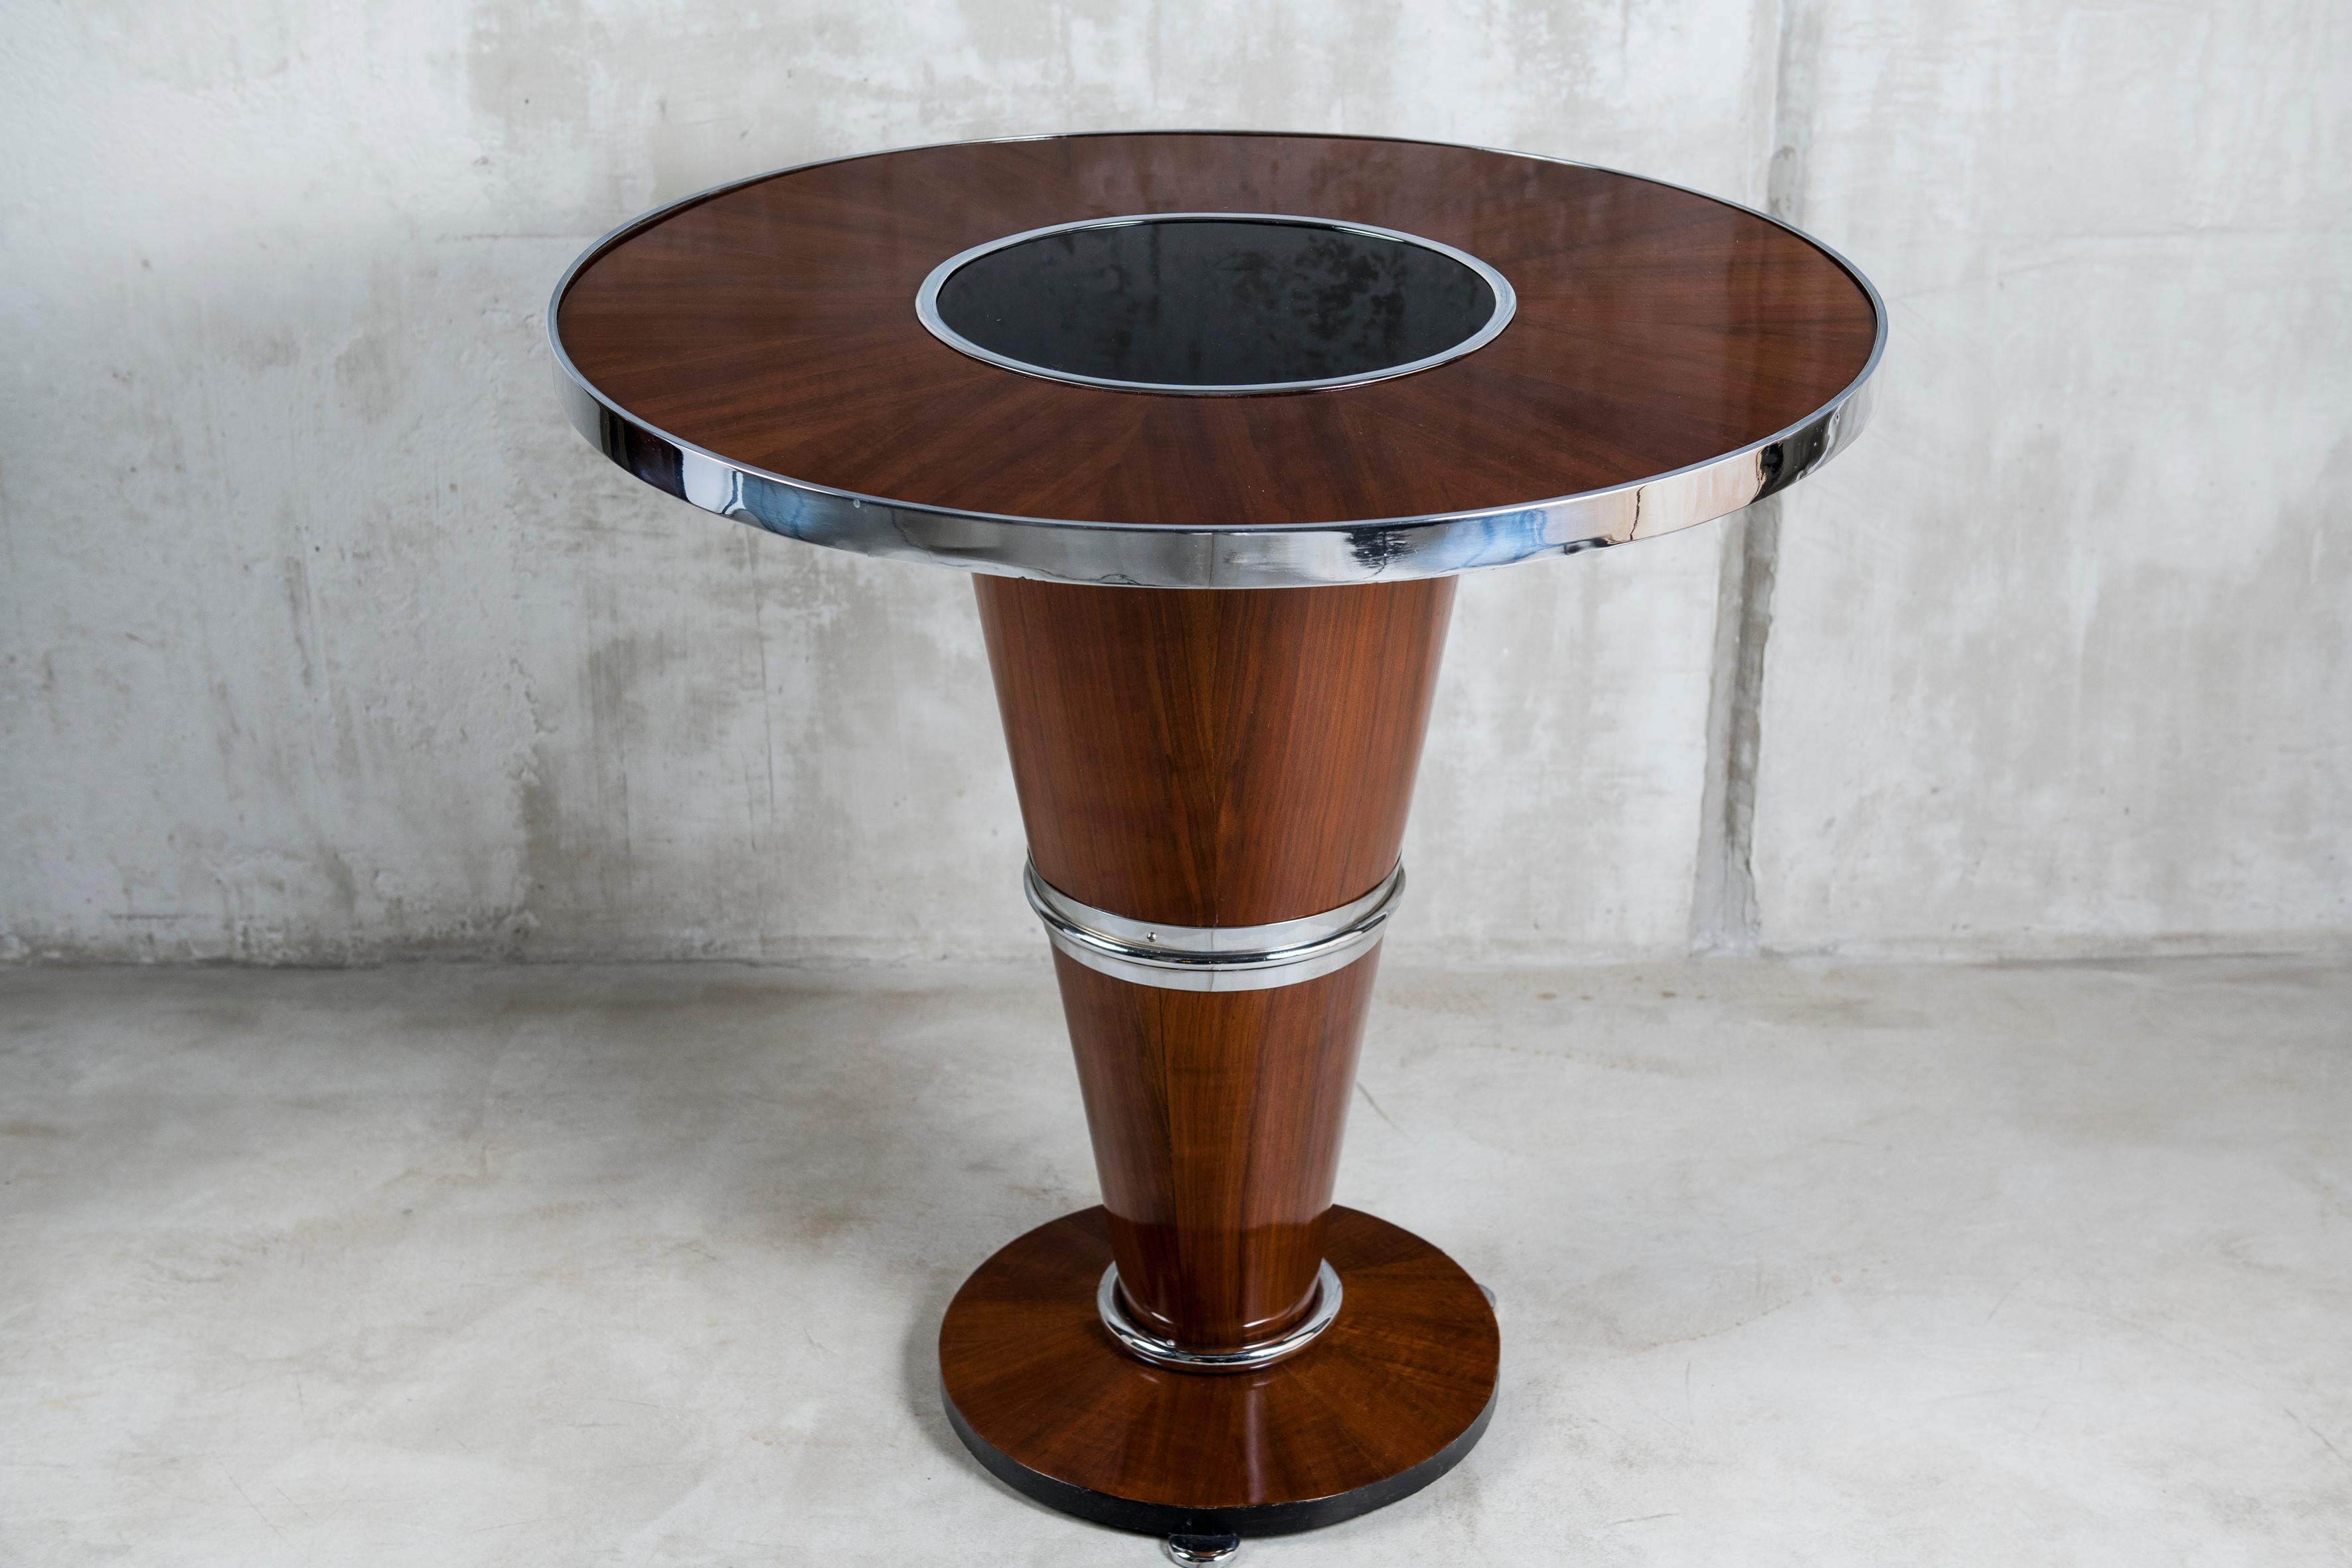 French Wood, Chrome and Glass Table, Art Deco Period, France, circa 1930-1940